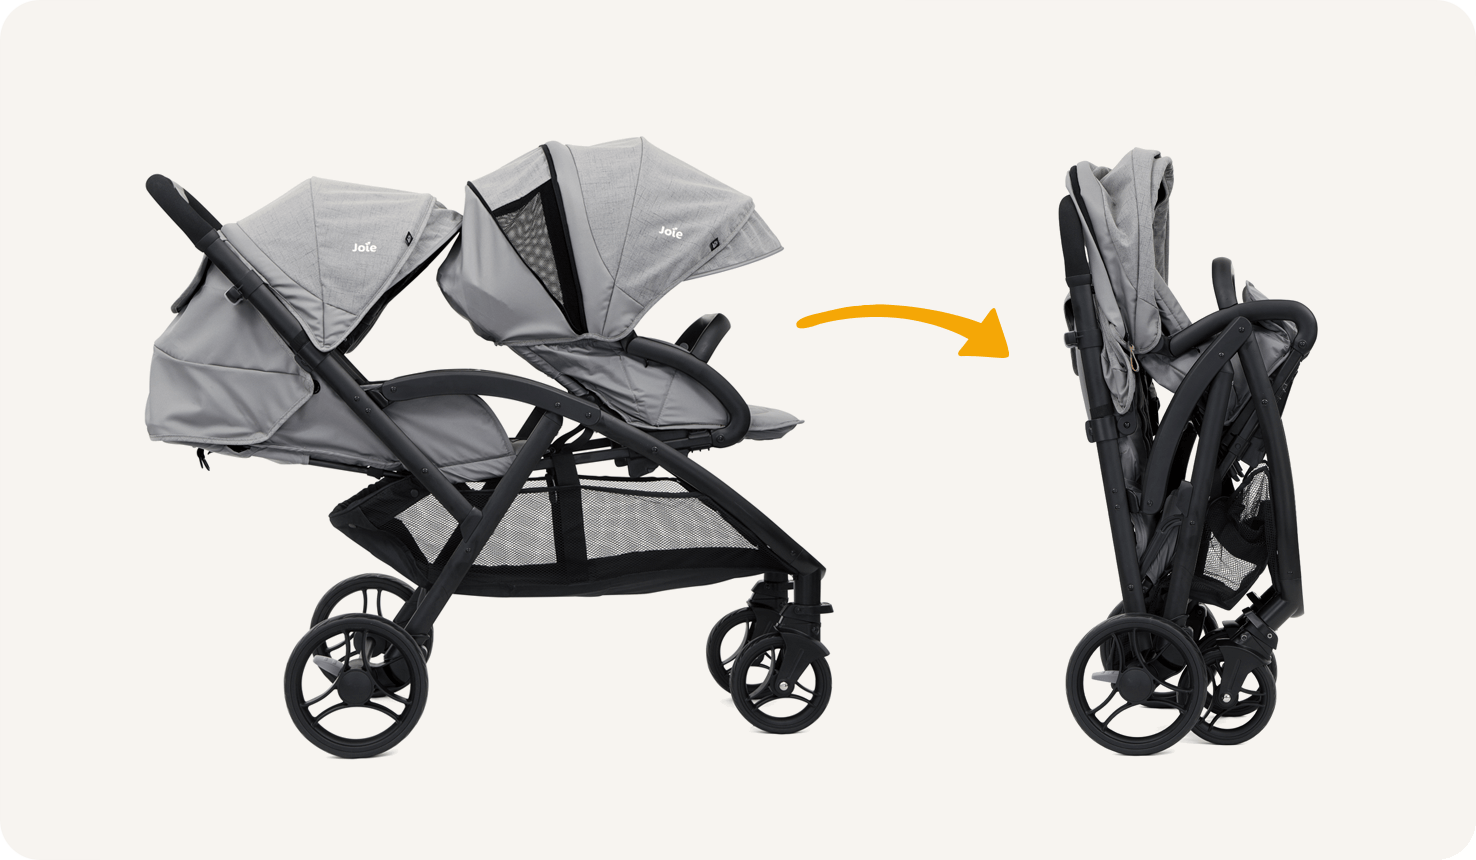 Joie evalite duo double buggy in gray in profile and folded.